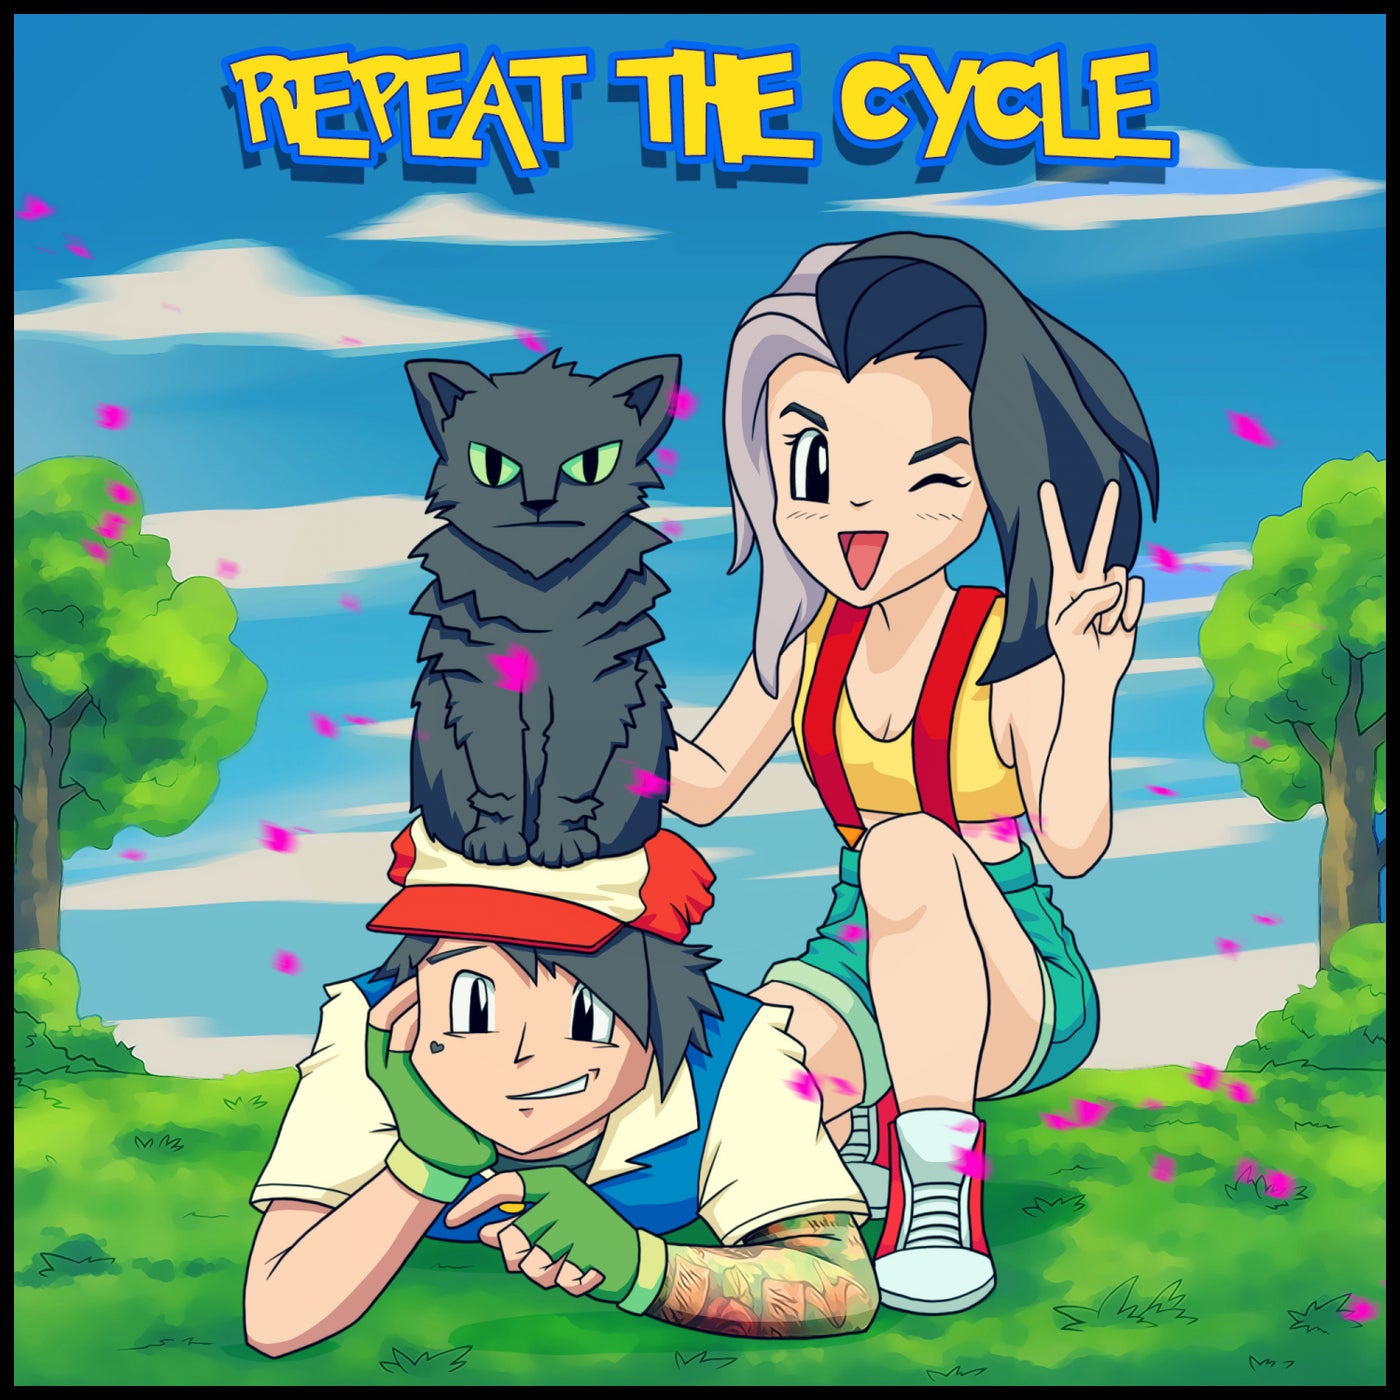 REPEAT THE CYCLE